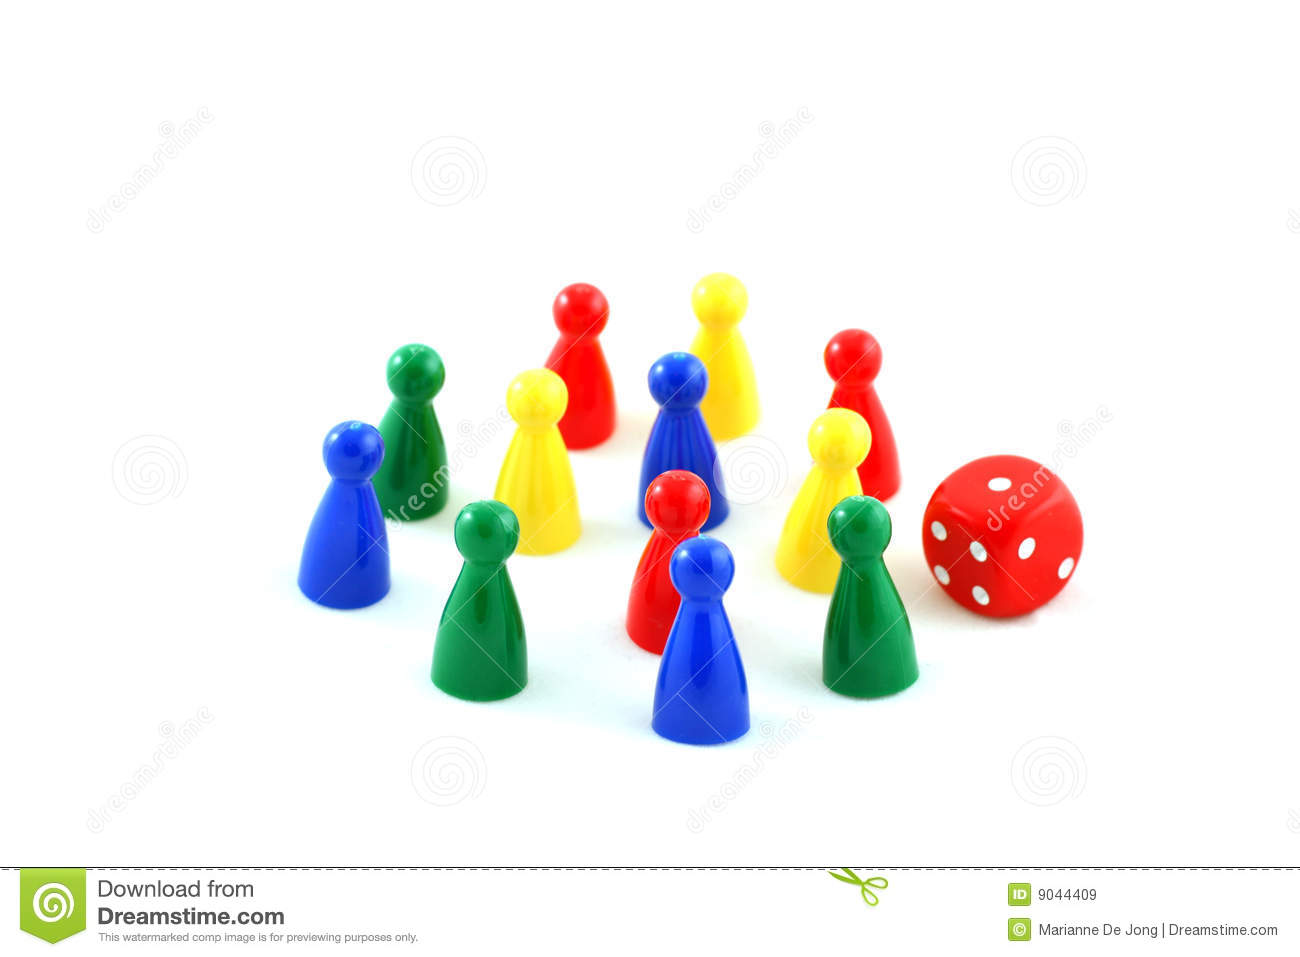 Boardgame Pieces Royalty Free Stock Images   Image  9044409